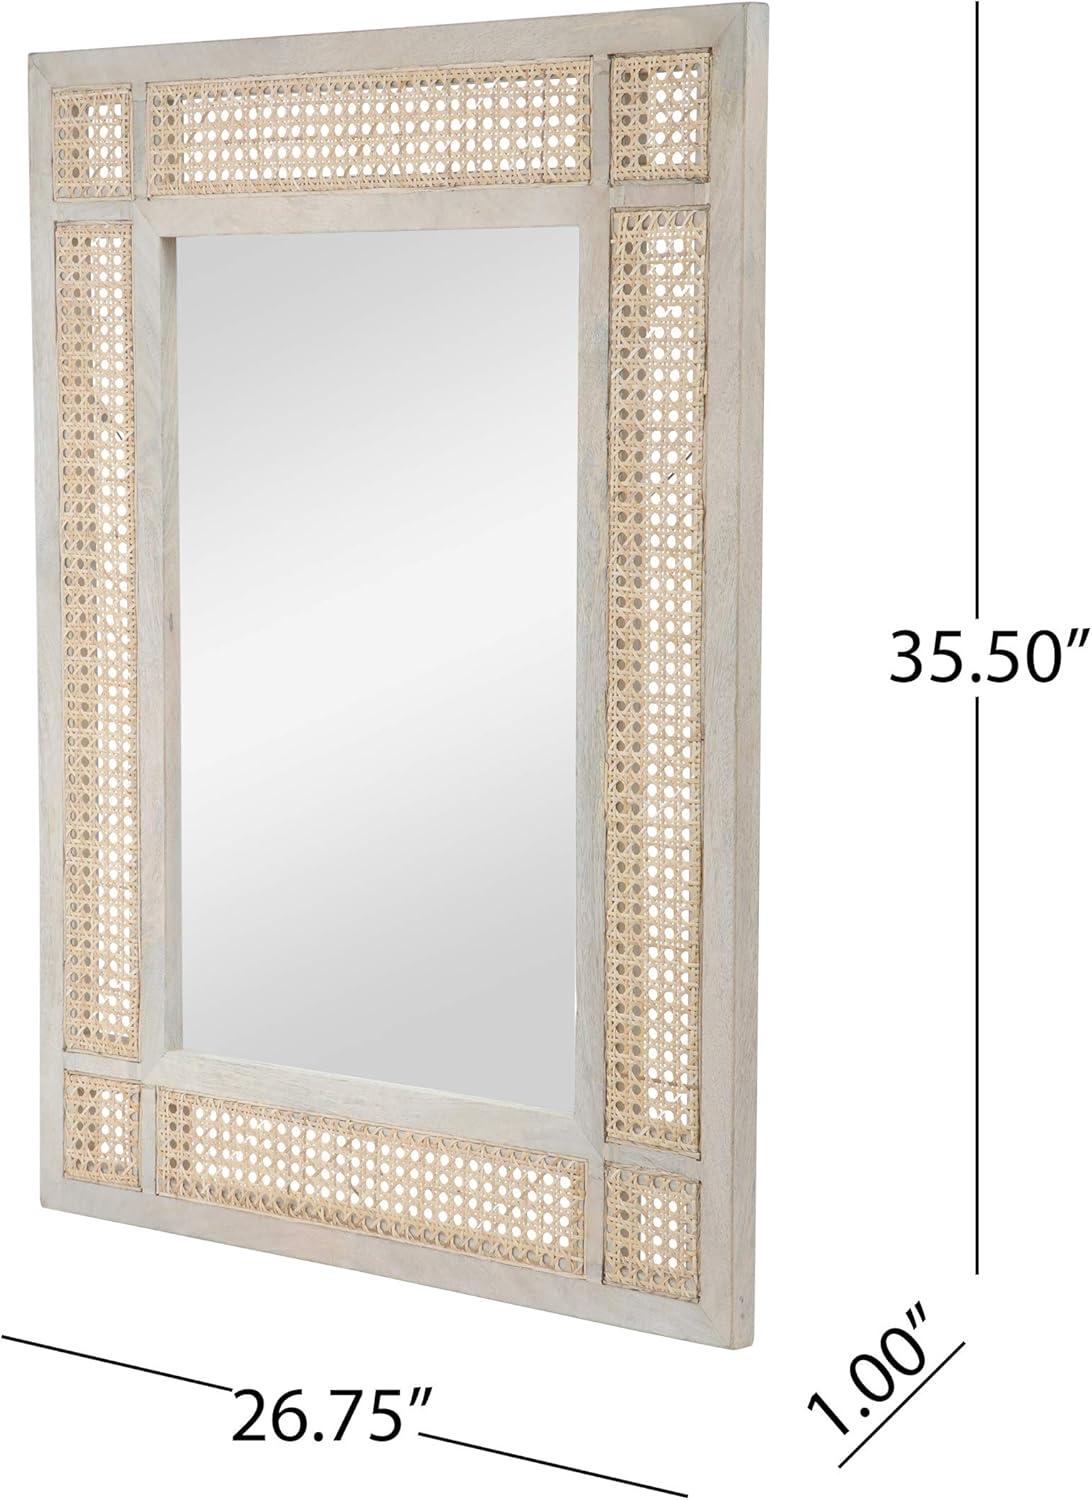 Boho Chic Handcrafted Mango Wood and Rattan Wall Mirror